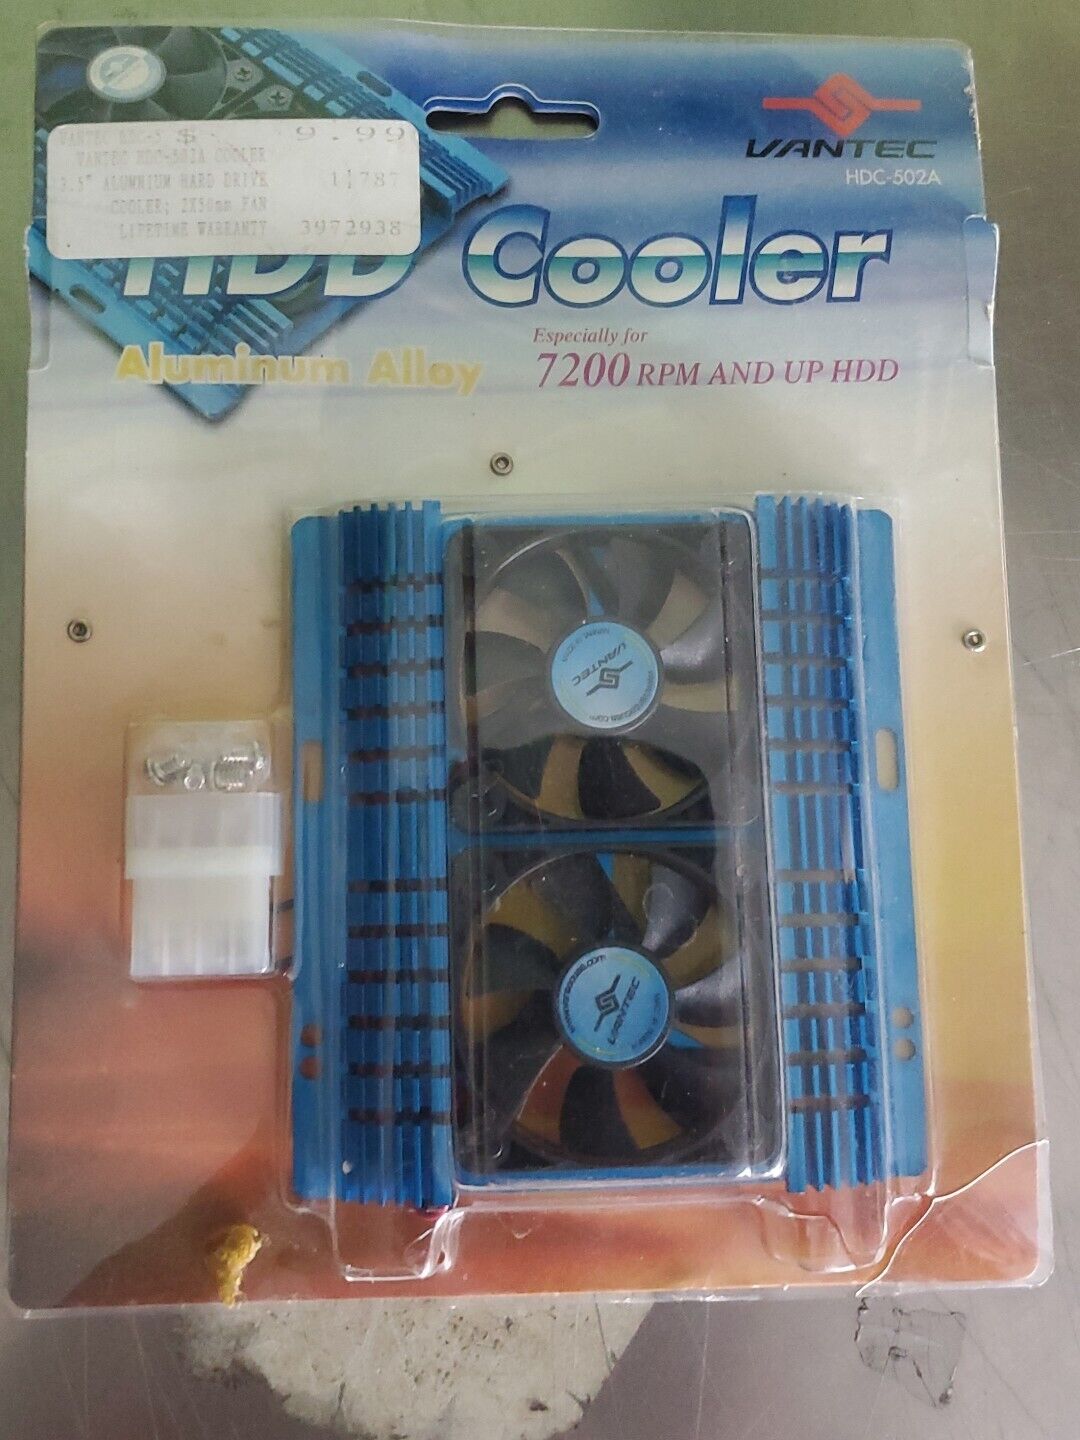 Vantec HHD Cooler Aluminium Alloy 7200 RPM and UP BrandNew Sealed Package Damage